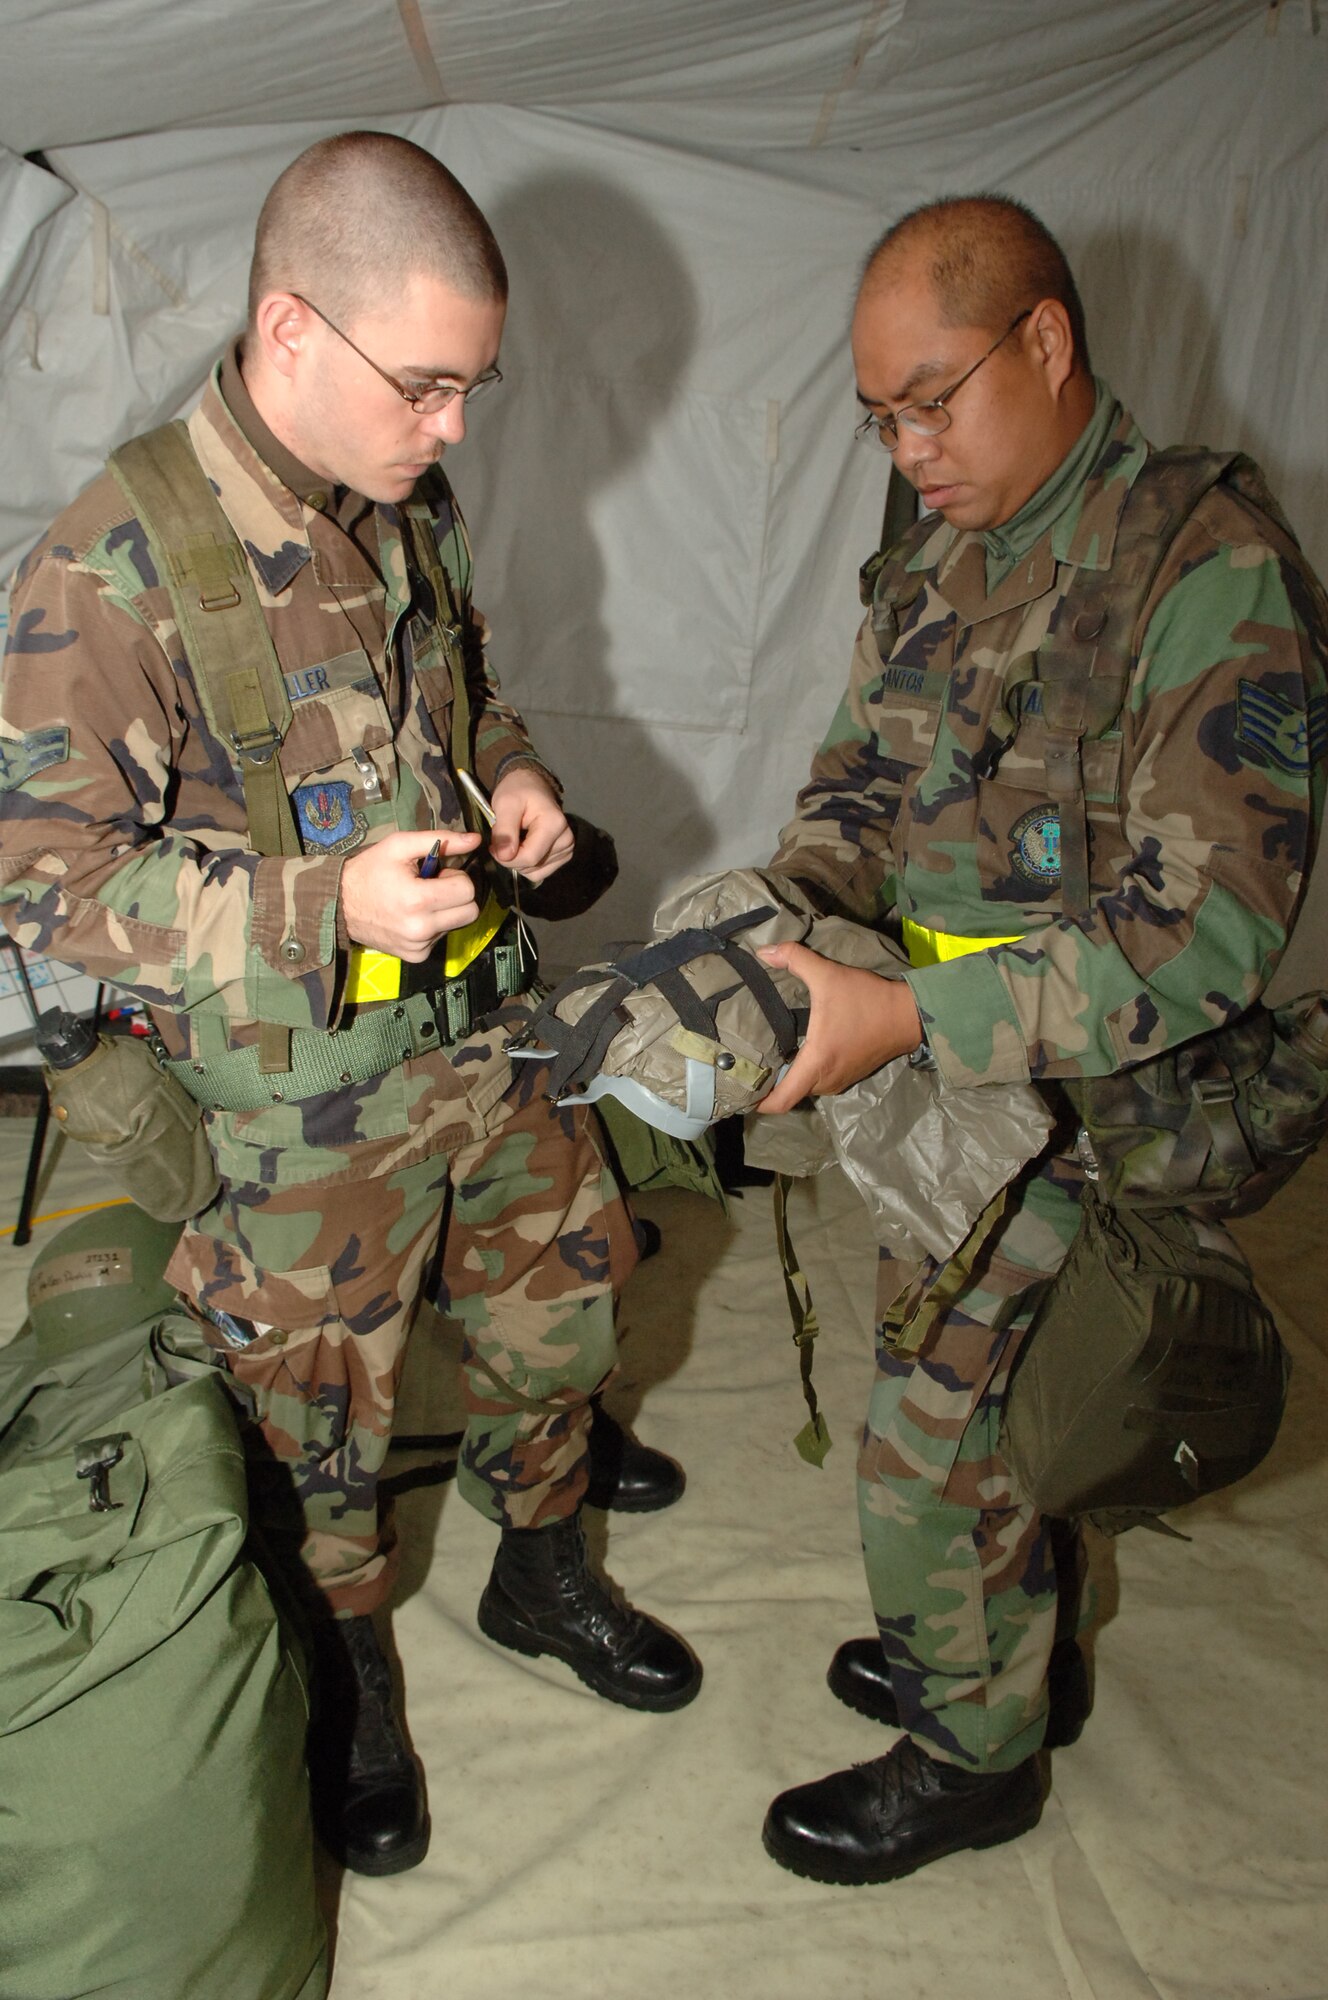 Staff Sgt. Alvin Santos, 435th Vehicle Readiness Squadron vehicle operator (right), shows Airman 1st Class Dustin Holler (left), 435th Vehicle Readiness Squadron vehicle operator, how to properly store his gas mask during the Operational Readiness Exercise at the field training site on Ramstein Air Base, Germany, Oct. 15. The exercise is designed to test the ability of Airmen to survive in austere environments with chemical, biological, radiological, nuclear and explosive hazards.  (U.S. Air Force Photo by Airman 1st Class Kelly LeGuillon) 